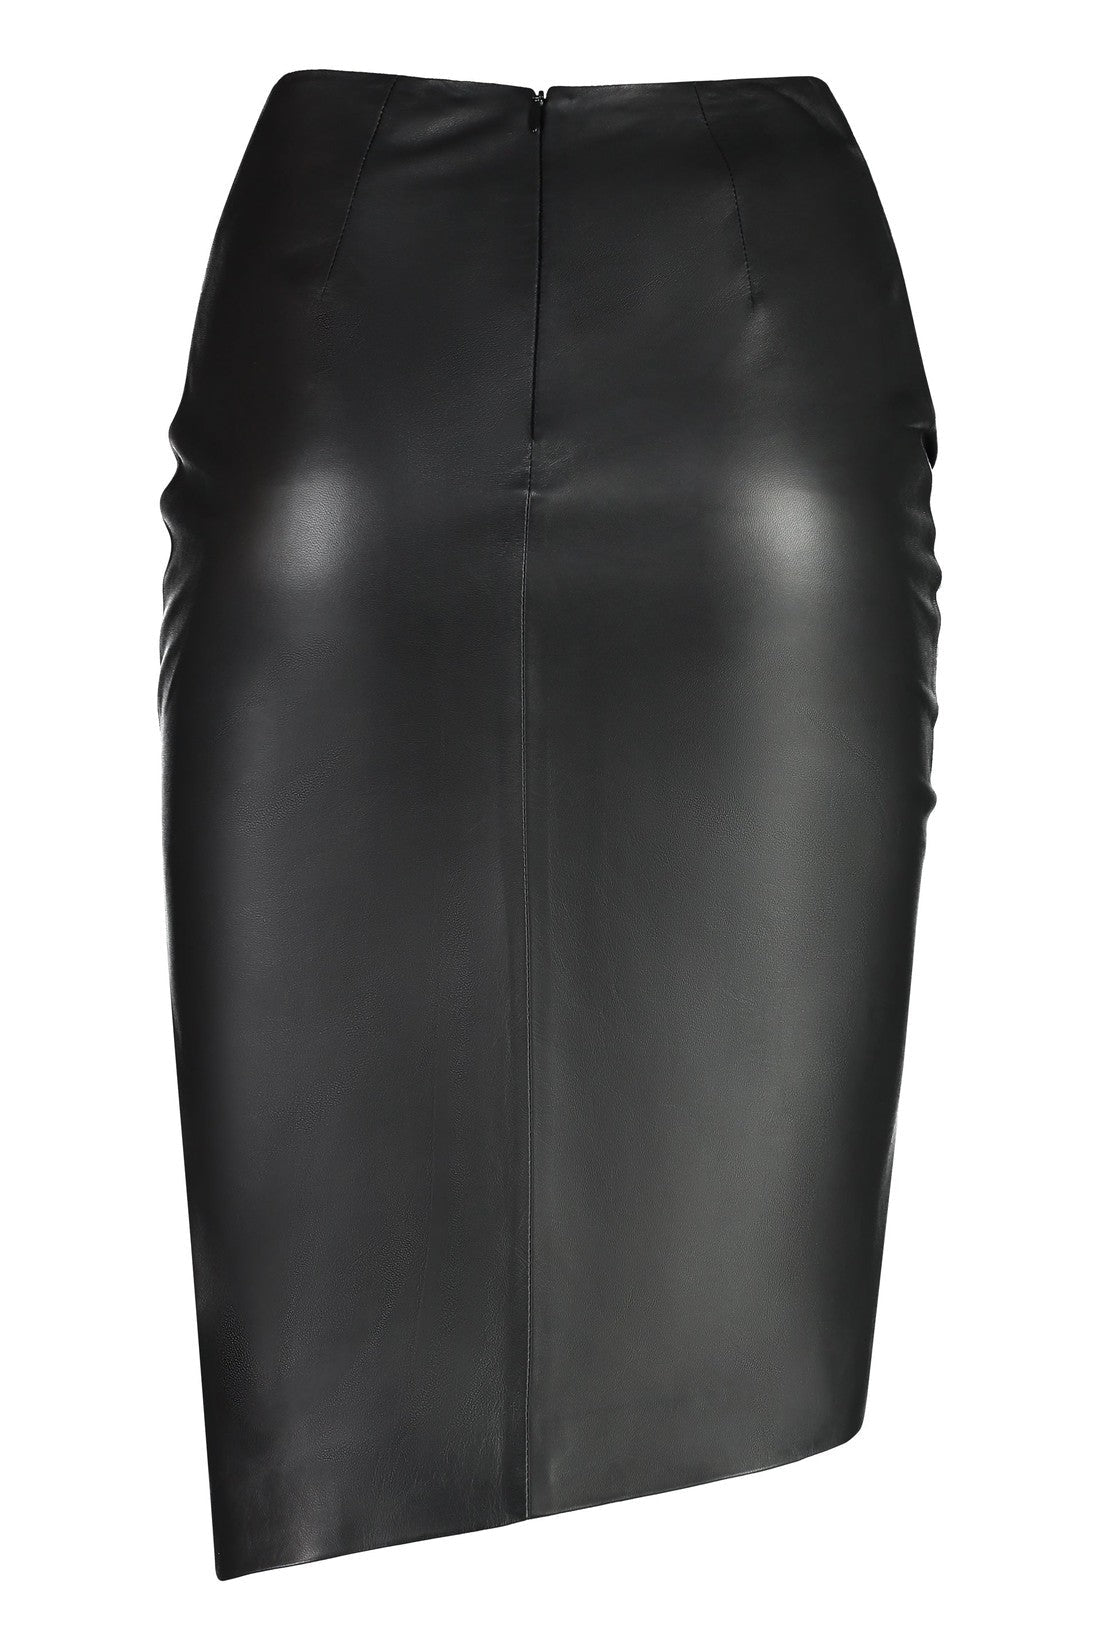 ANDREADAMO-OUTLET-SALE-Leather skirt-ARCHIVIST